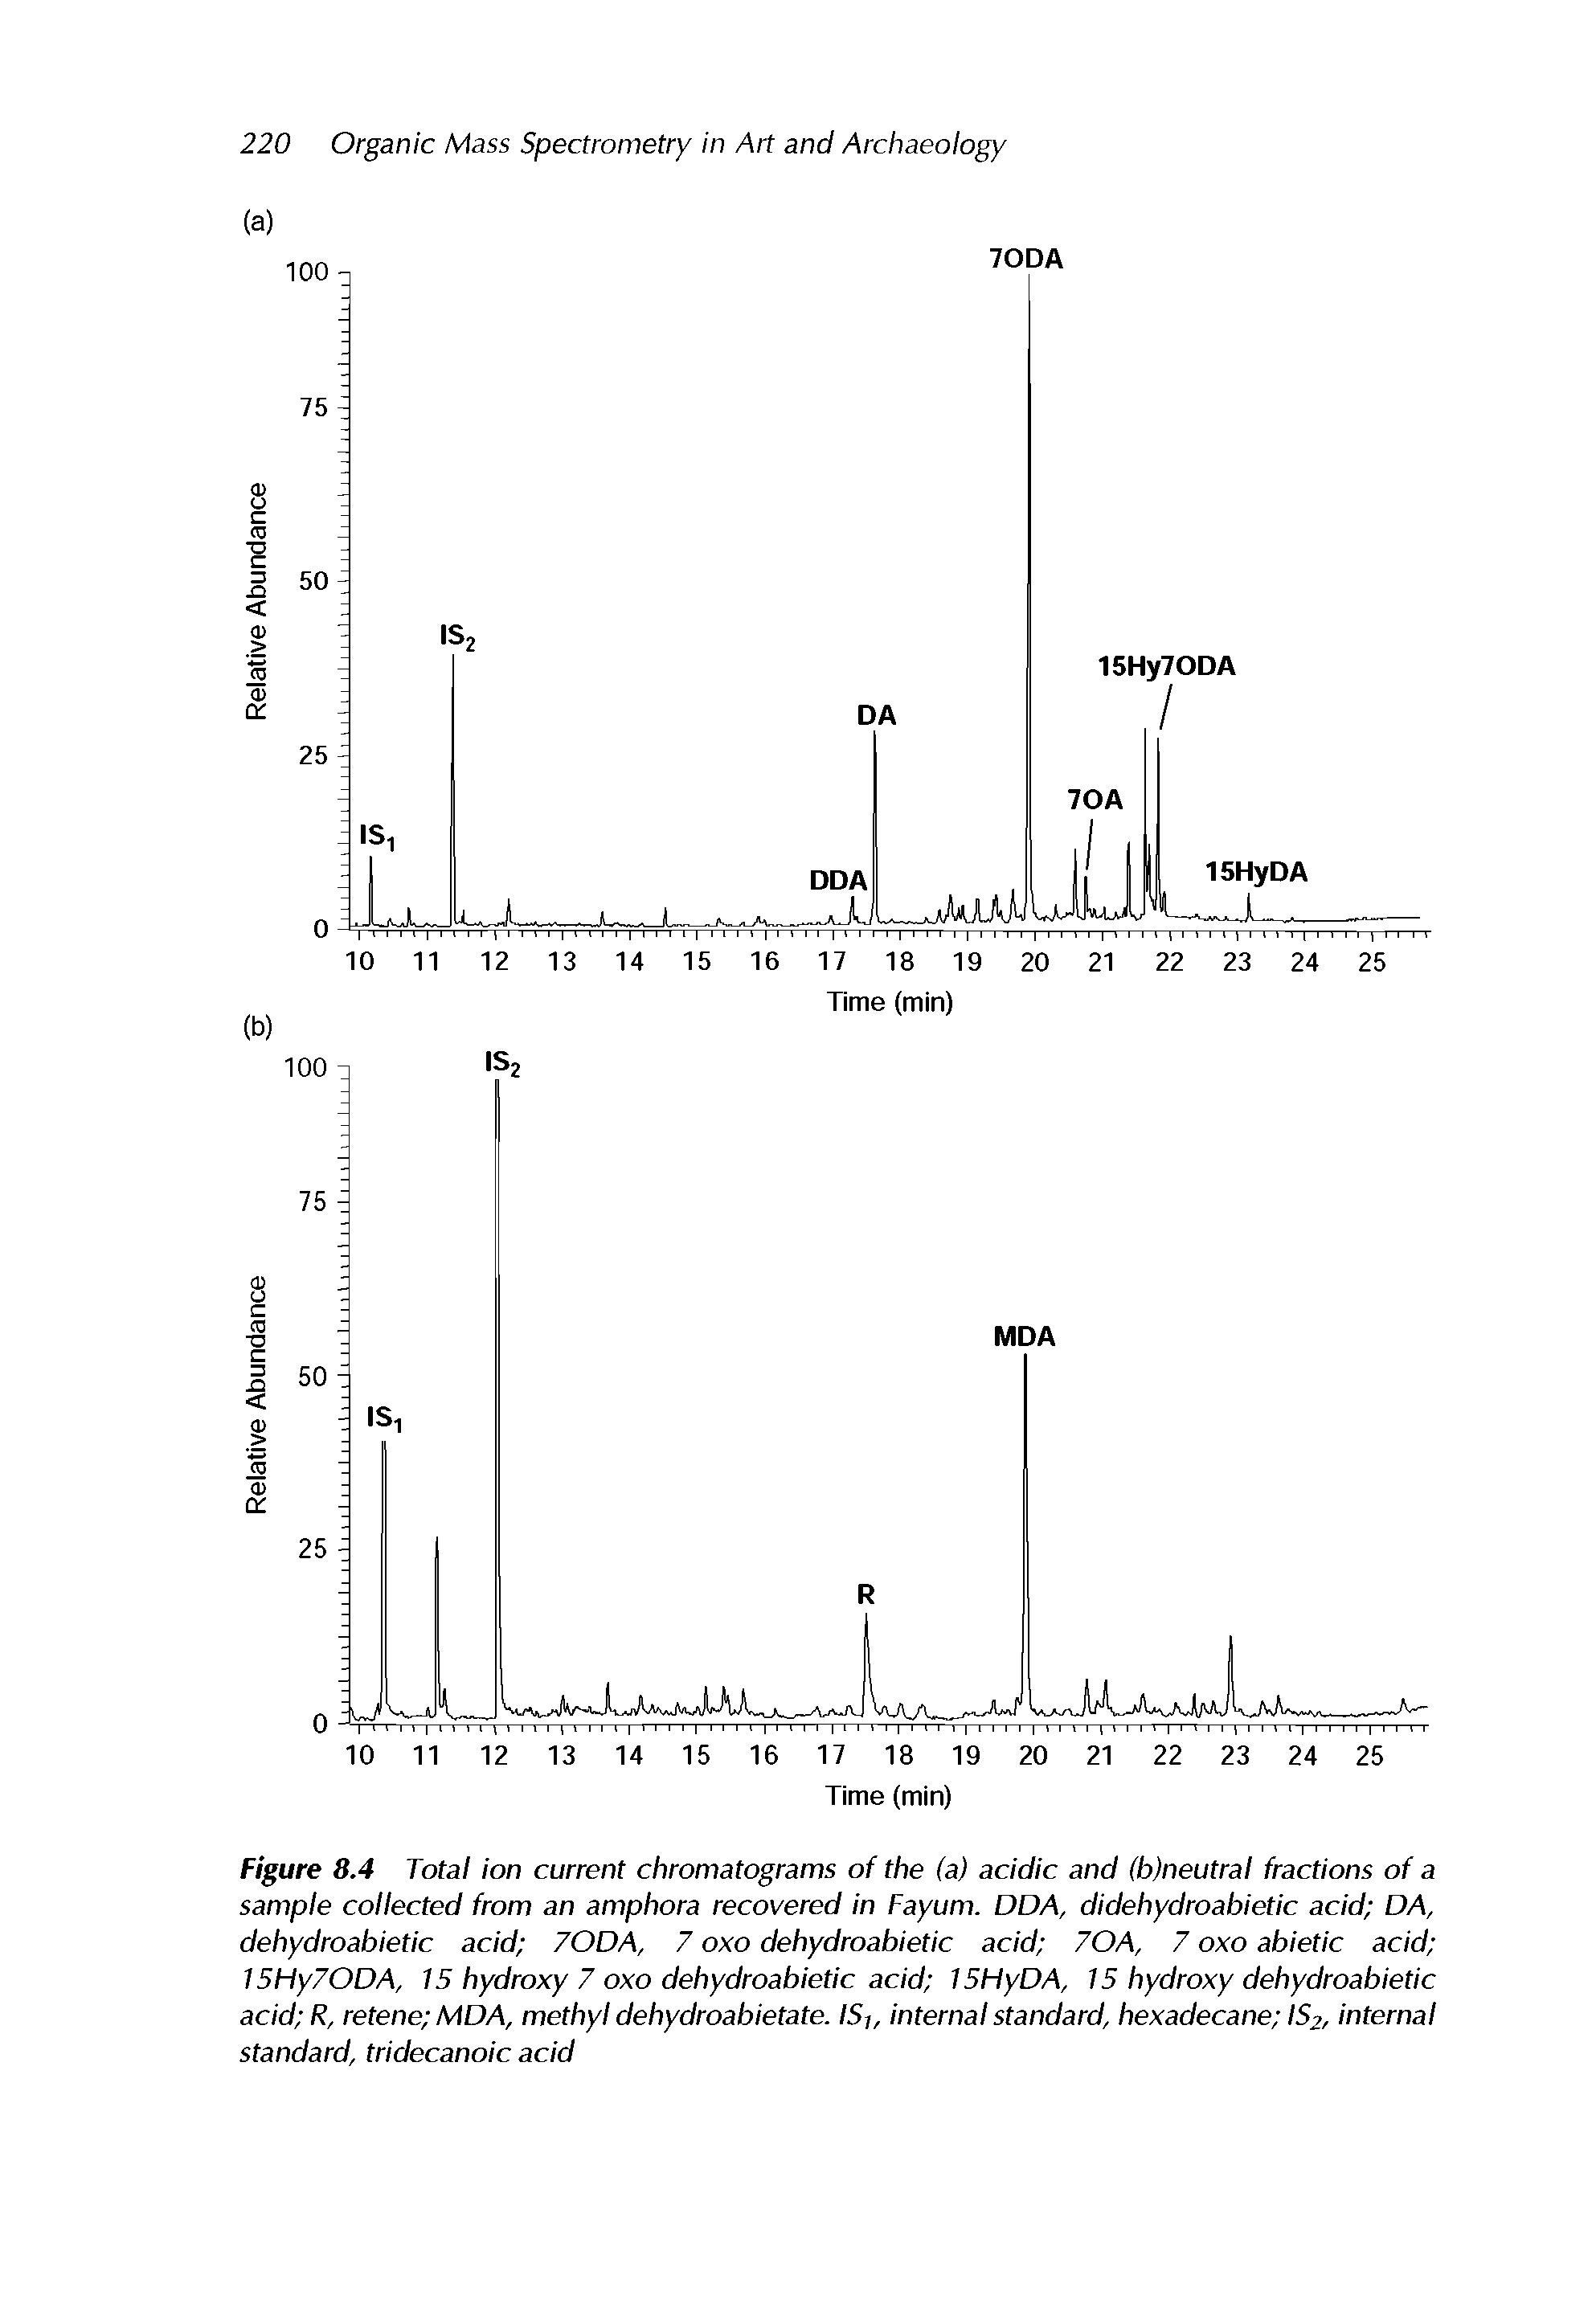 Figure 8.4 Total ion current chromatograms of the (a) acidic and (b)neutral fractions of a sample collected from an amphora recovered in Fayum. DDA, didehydroabietic acid DA, dehydroabietic acid 70DA, 7 oxo dehydroabietic acid 70A, 7 oxo abietic acid 15Hy70DA, 15 hydroxy 7 oxo dehydroabietic acid 5HyDA, 15 hydroxy dehydroabietic acid R, retene MDA, methyl dehydroabietate. Slf internal standard, hexadecane IS2, internal standard, tridecanoic acid...